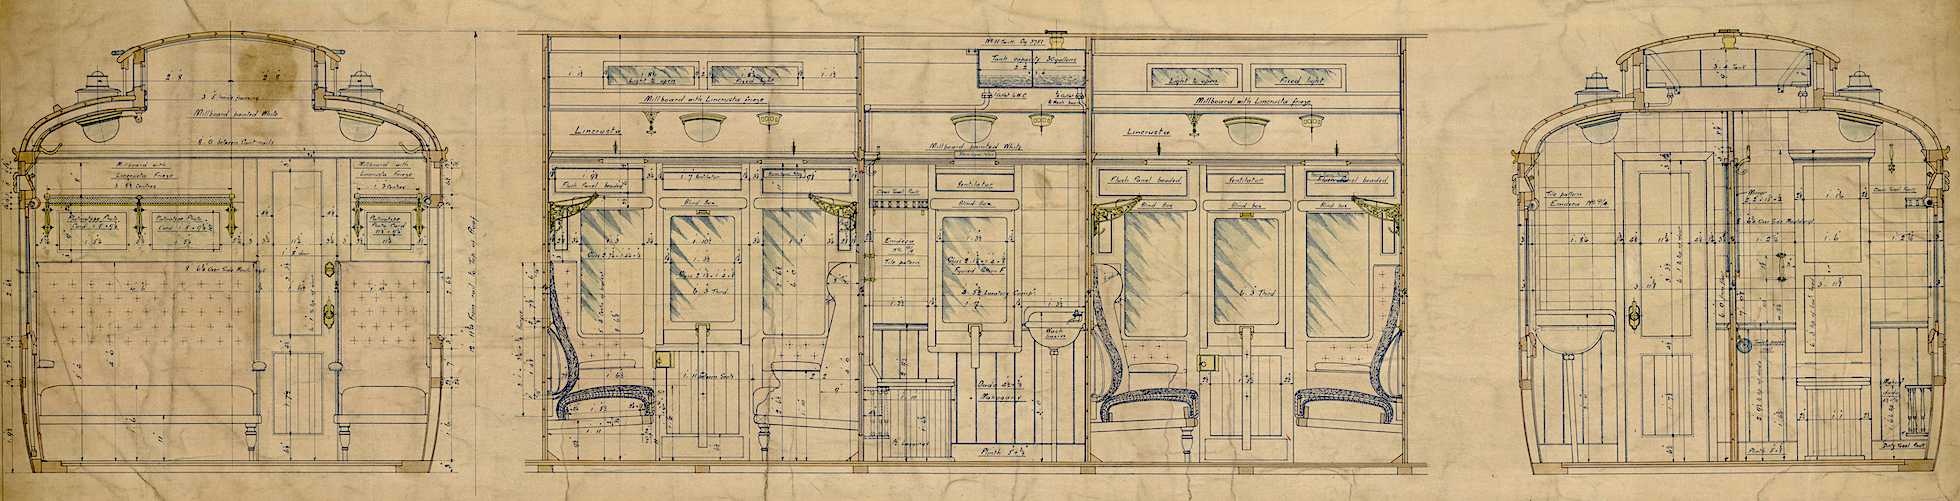 Detailed drawing showing the interior fixtures and fittings of a Midland Railway third class compartment